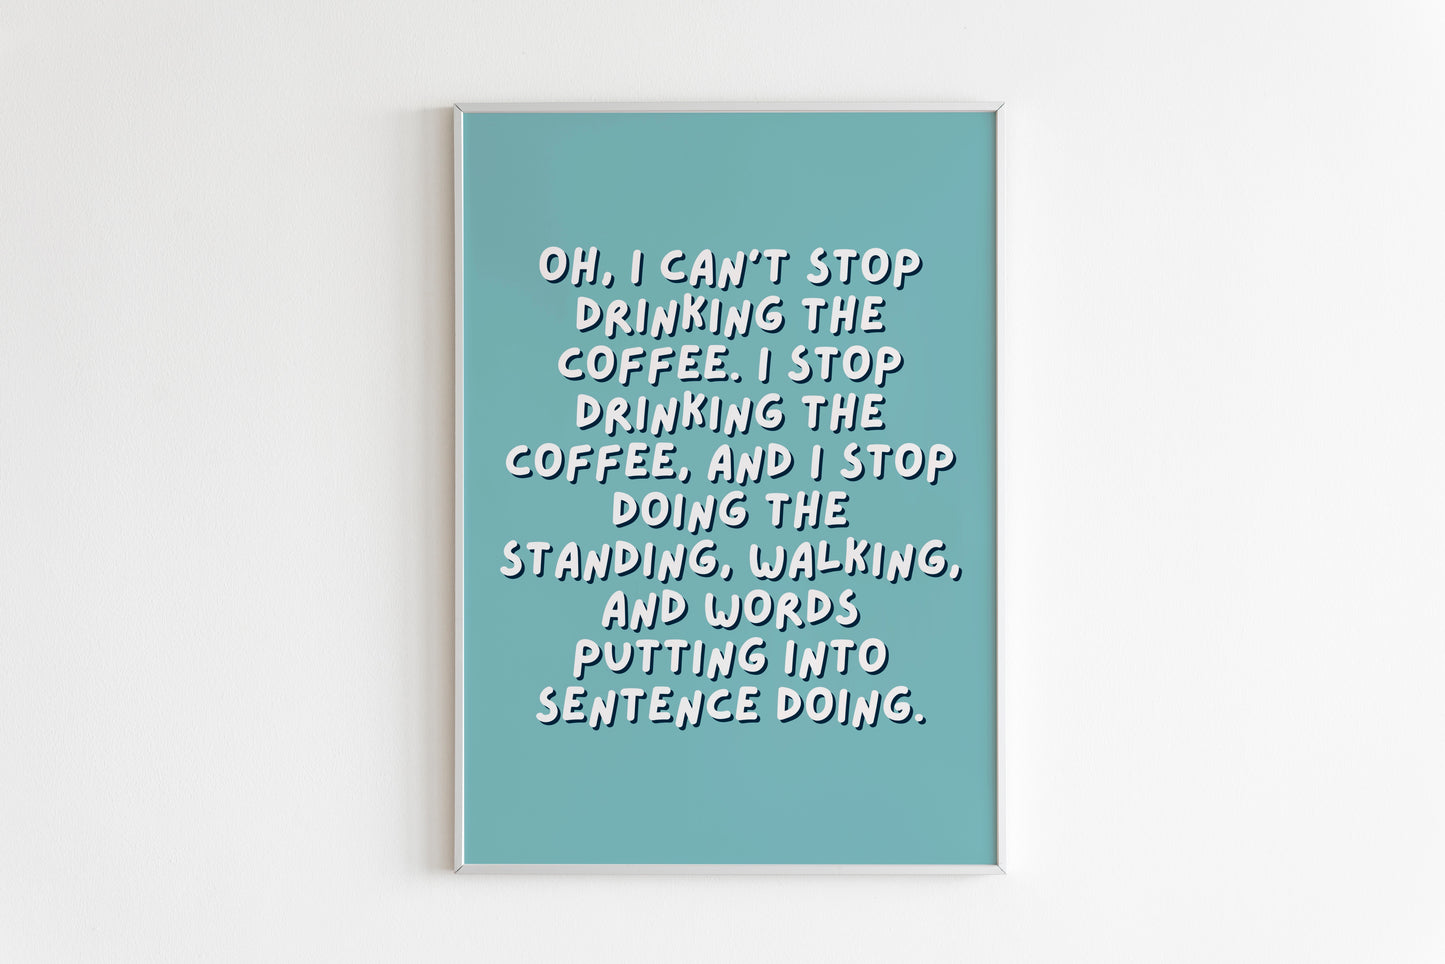 I Can't Stop Drinking The Coffee Quote Print (Lorelai Gilmore - Gilmore Girls)